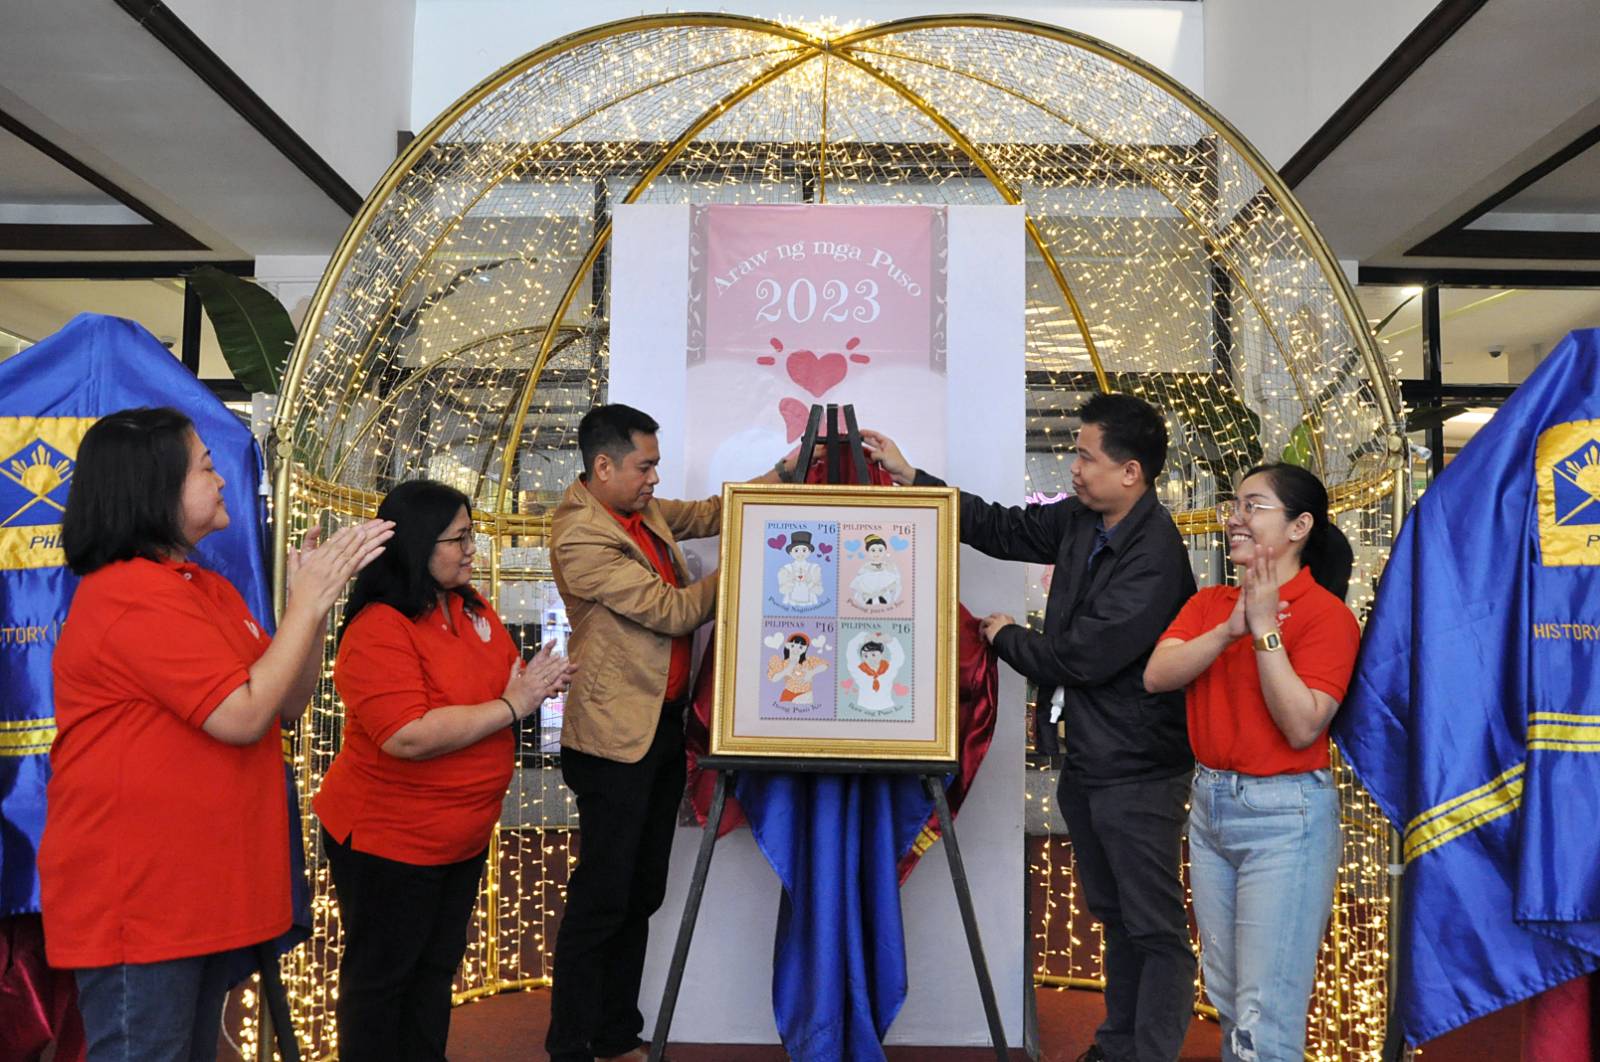 Philippine Post Office launches “Pupusuan Kita” Valentine’s Day Stamps and greeting cards